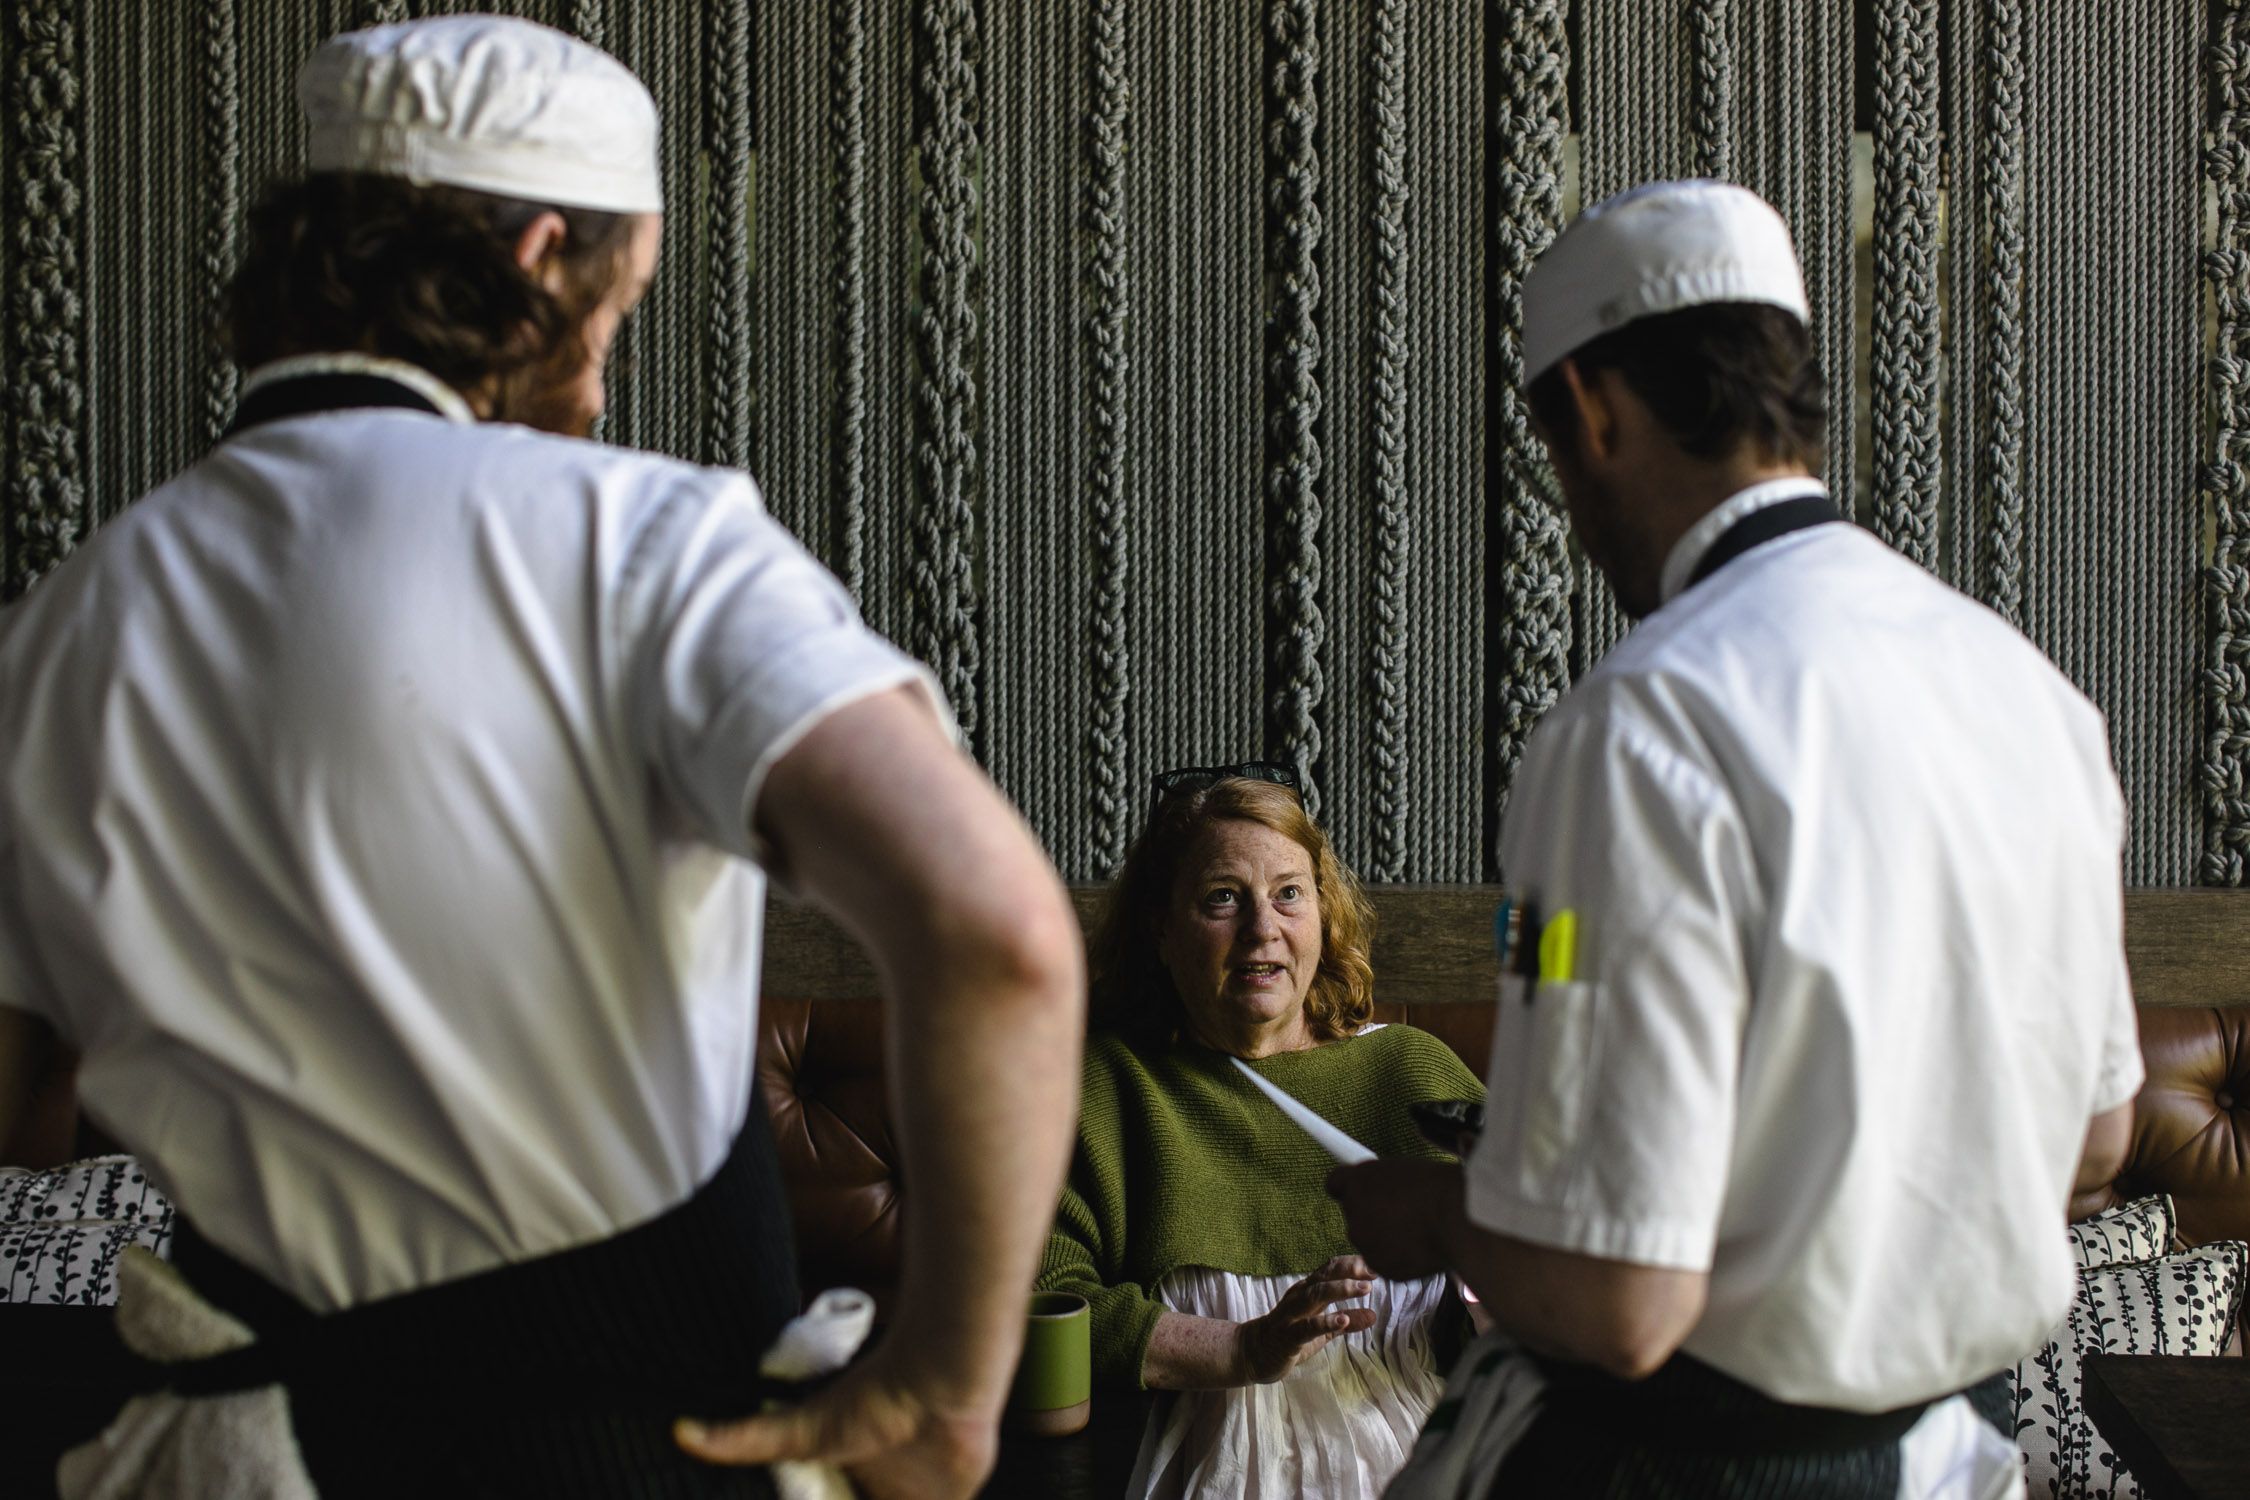 Anne Quatrano talking with her culinary team at Bacchanalia